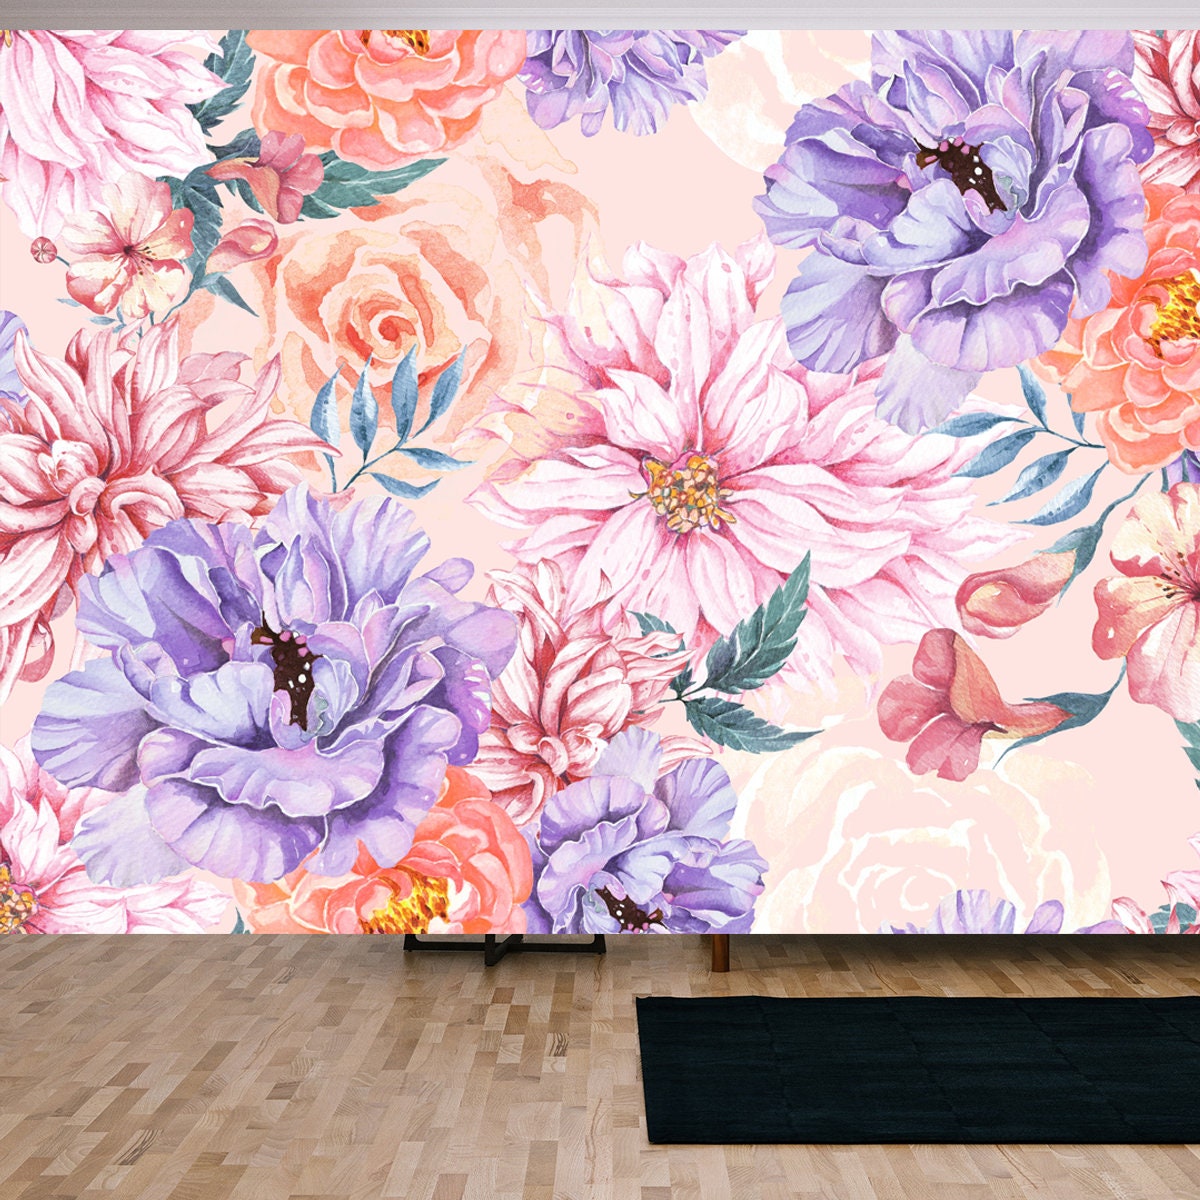 Pattern of Chrysanthemum, Rose, Peony and Blooming Flowers with Watercolor on Pastel Colors Wallpaper Living Room Mural